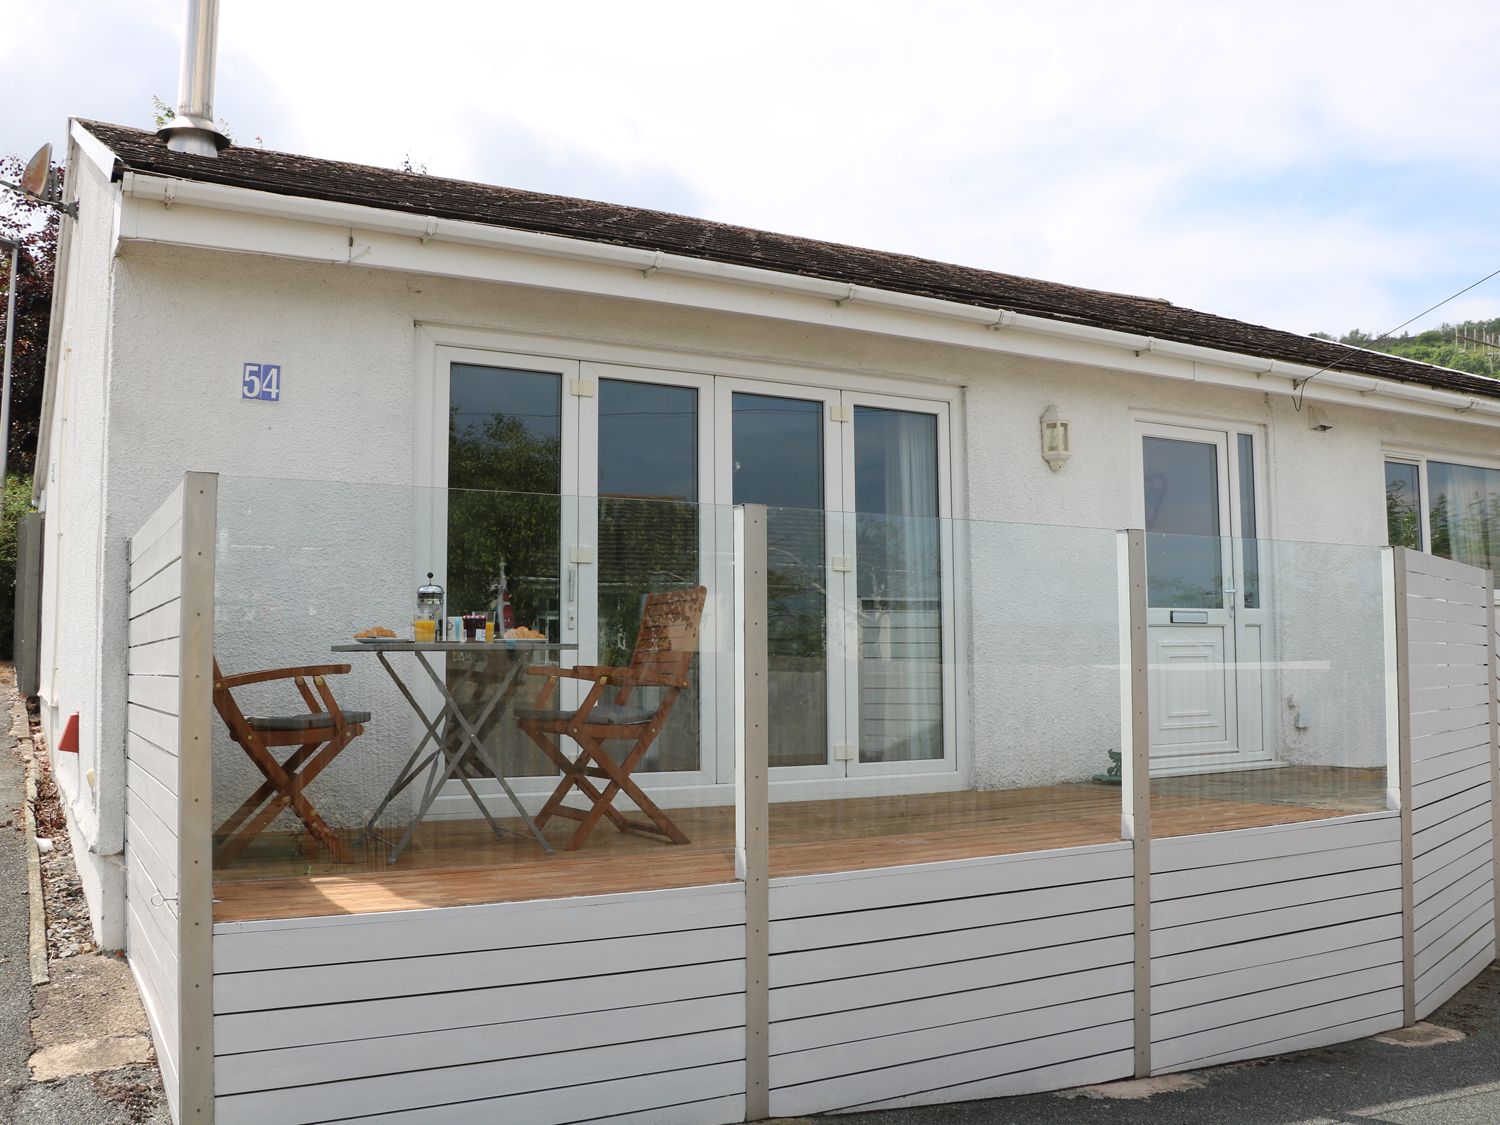 The moorings holiday bungalow St Dogmaels open plan accommodation